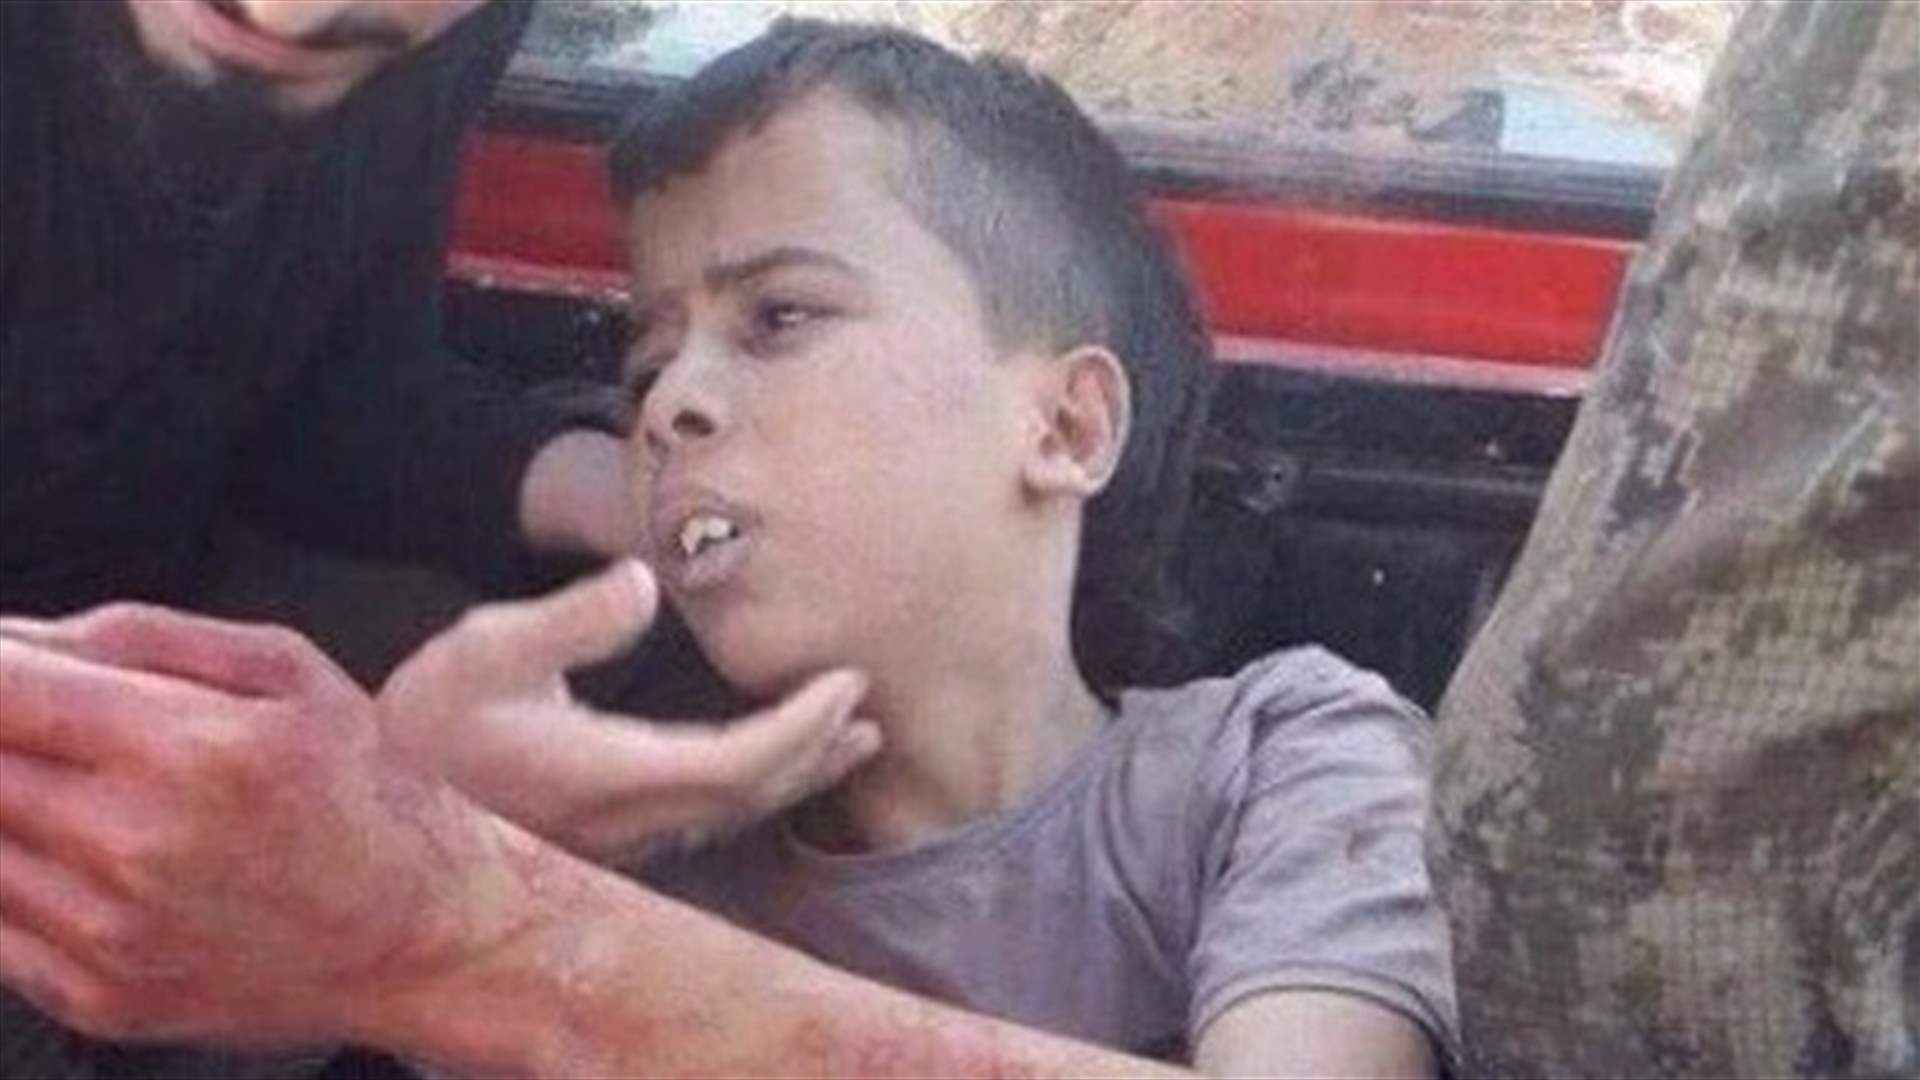 [PHOTOS] Syrian rebel group says investigating child beheading video